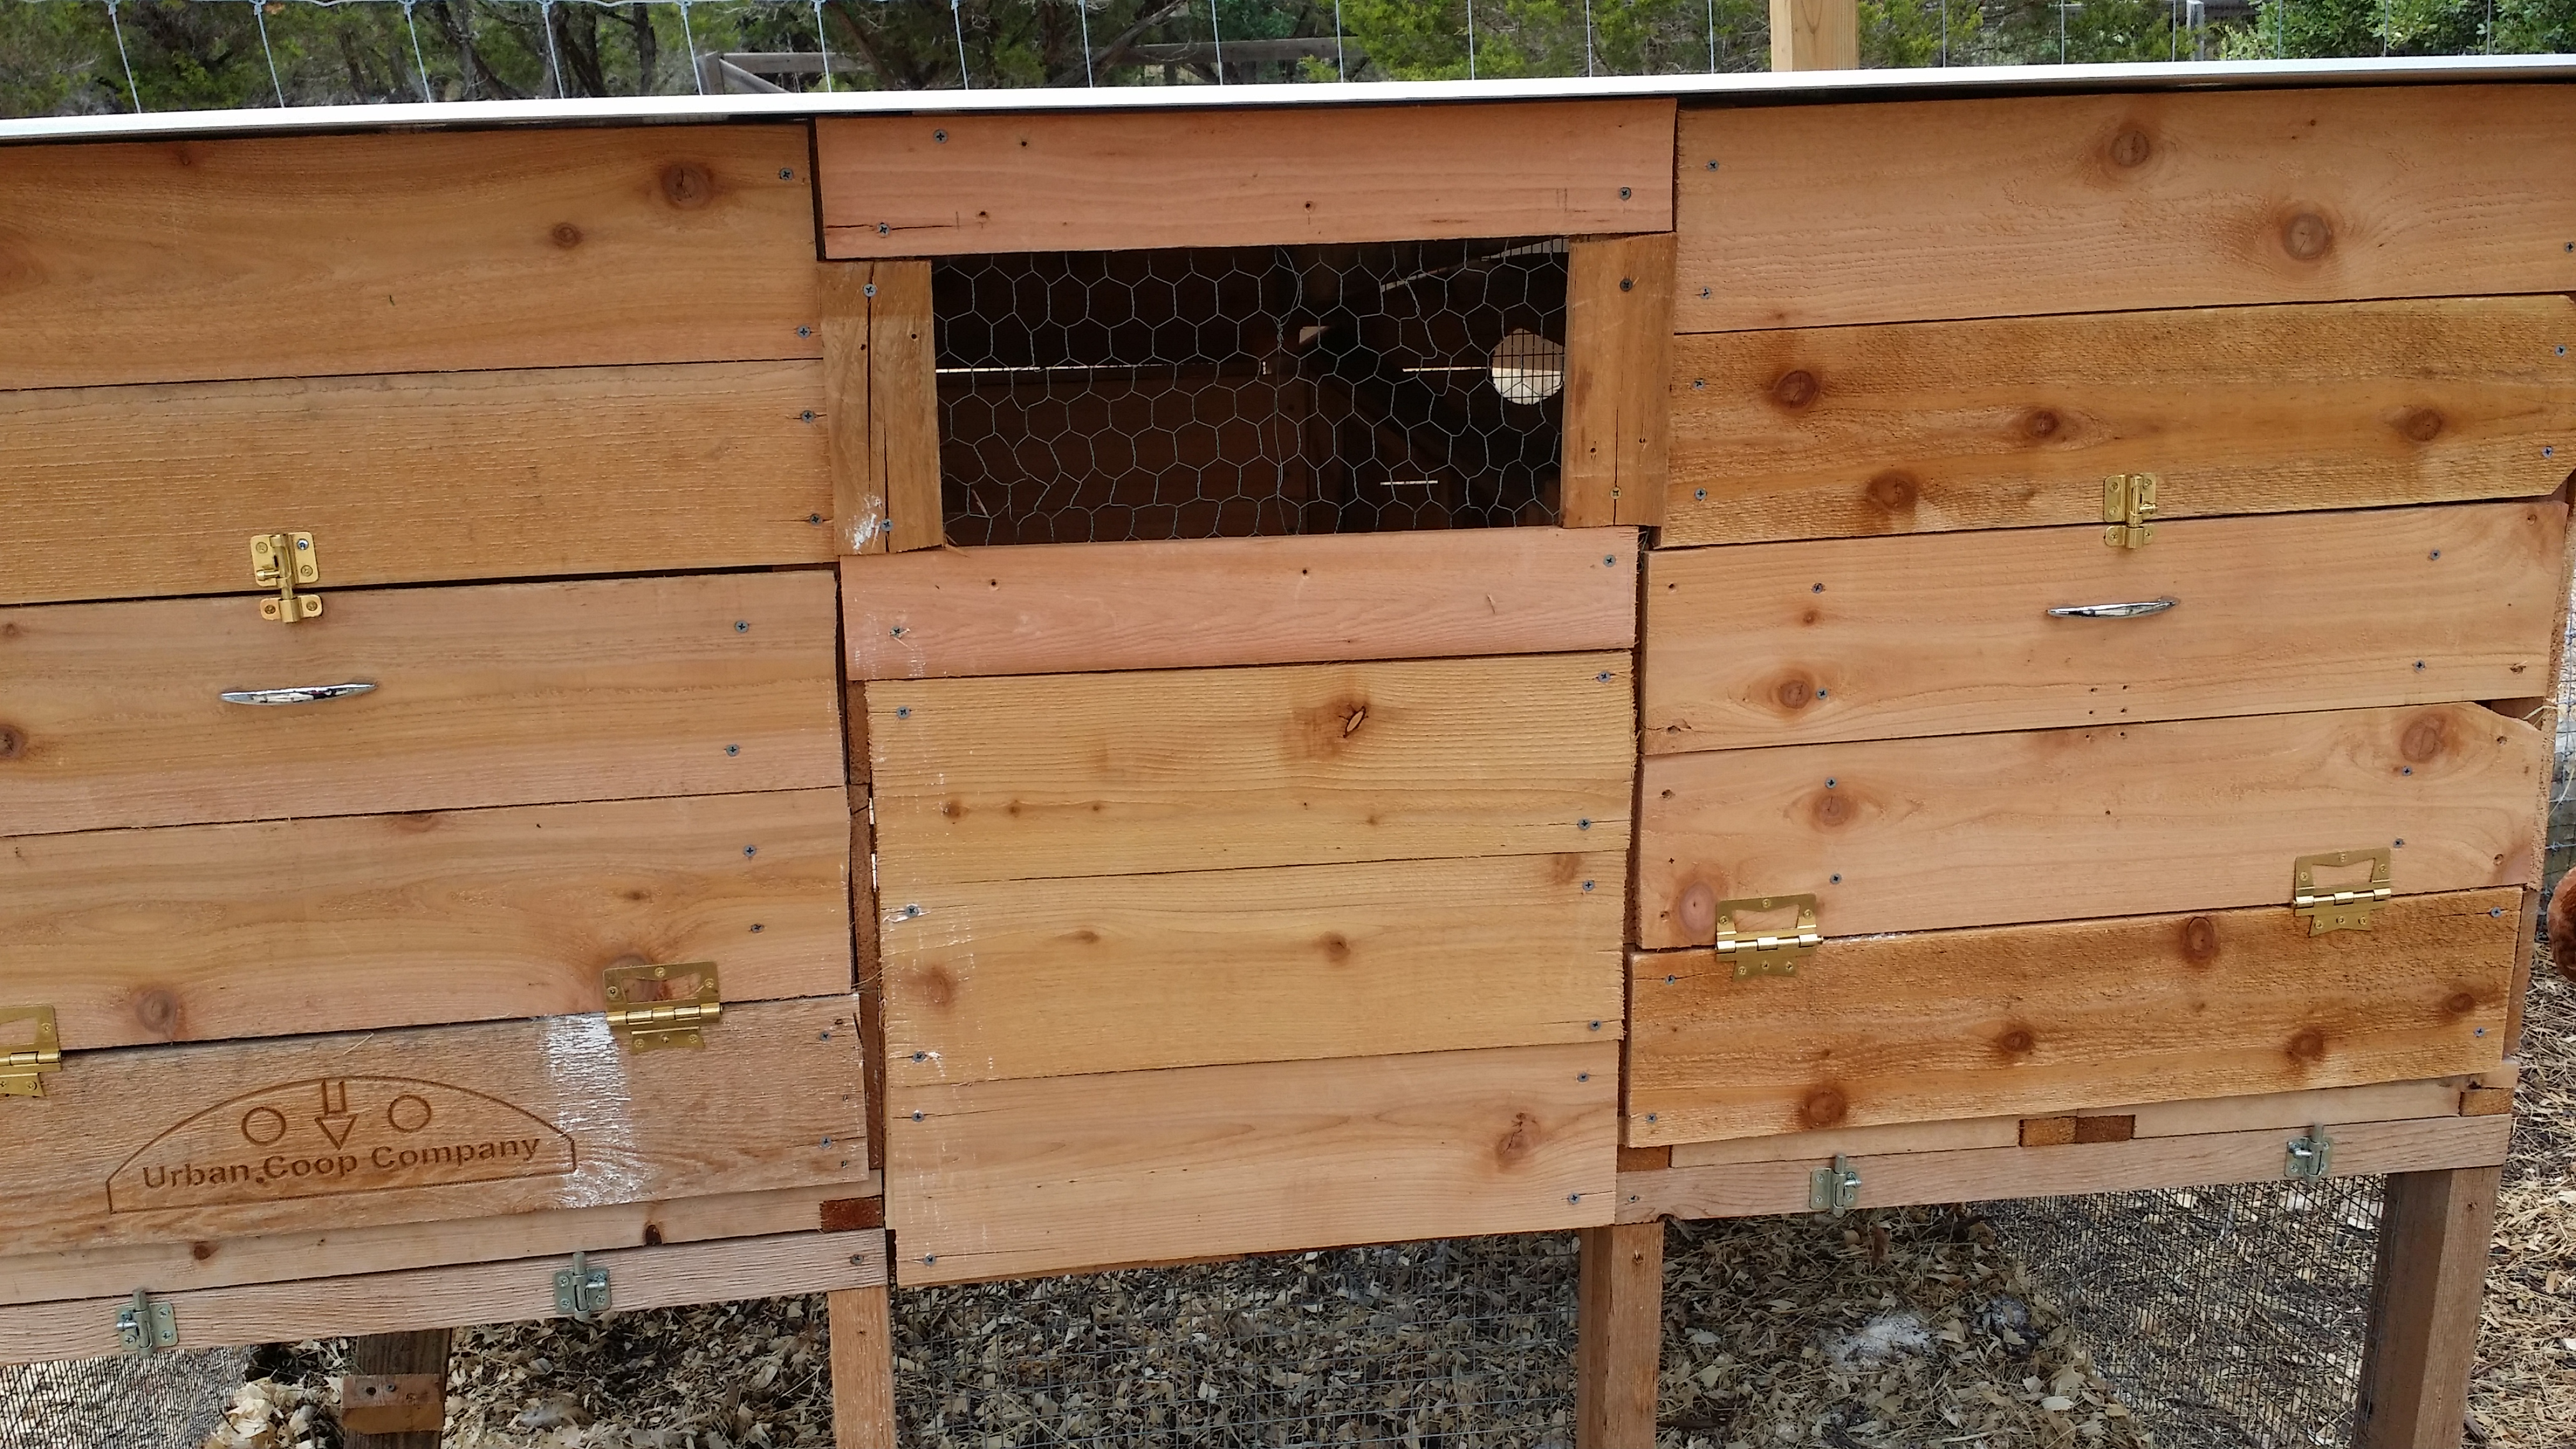 This is the front. 2 nest boxes can be seen here.